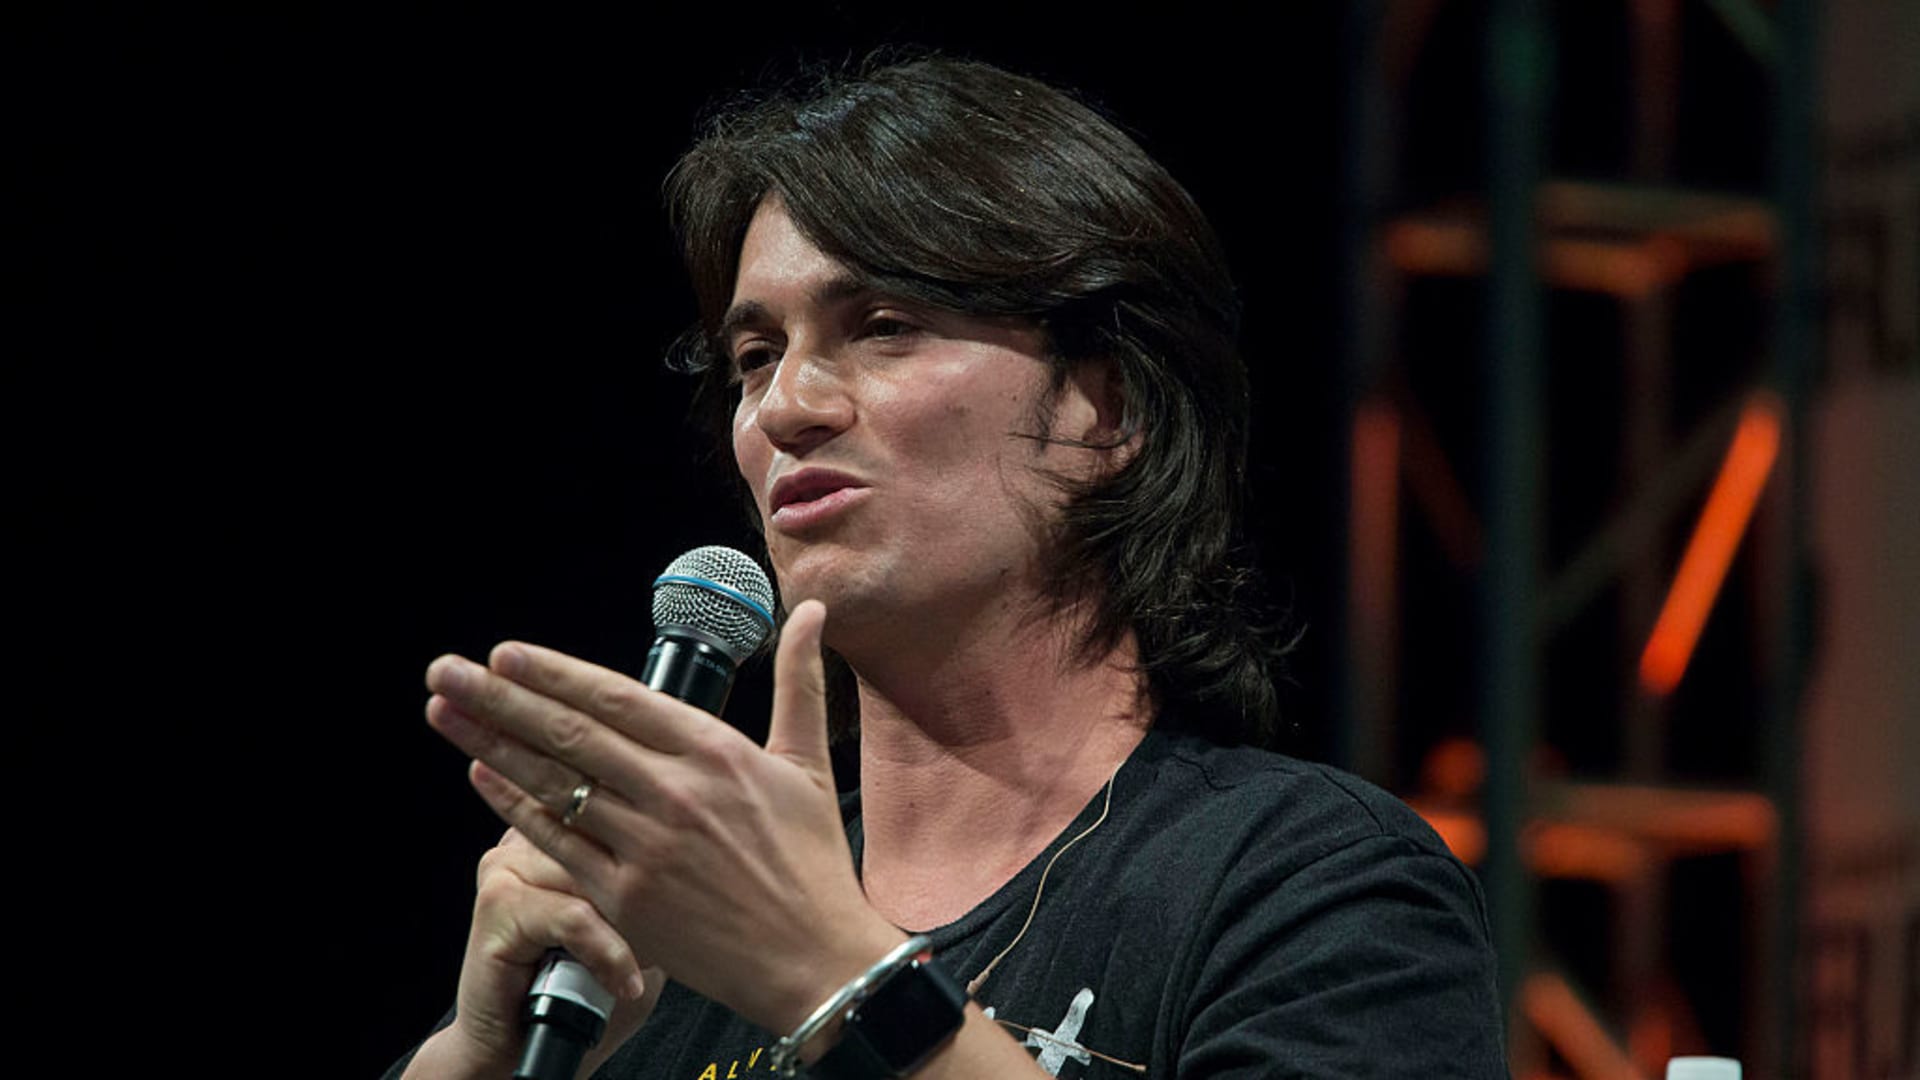 Adam Neumann, co-founder and former chief executive officer of WeWork.